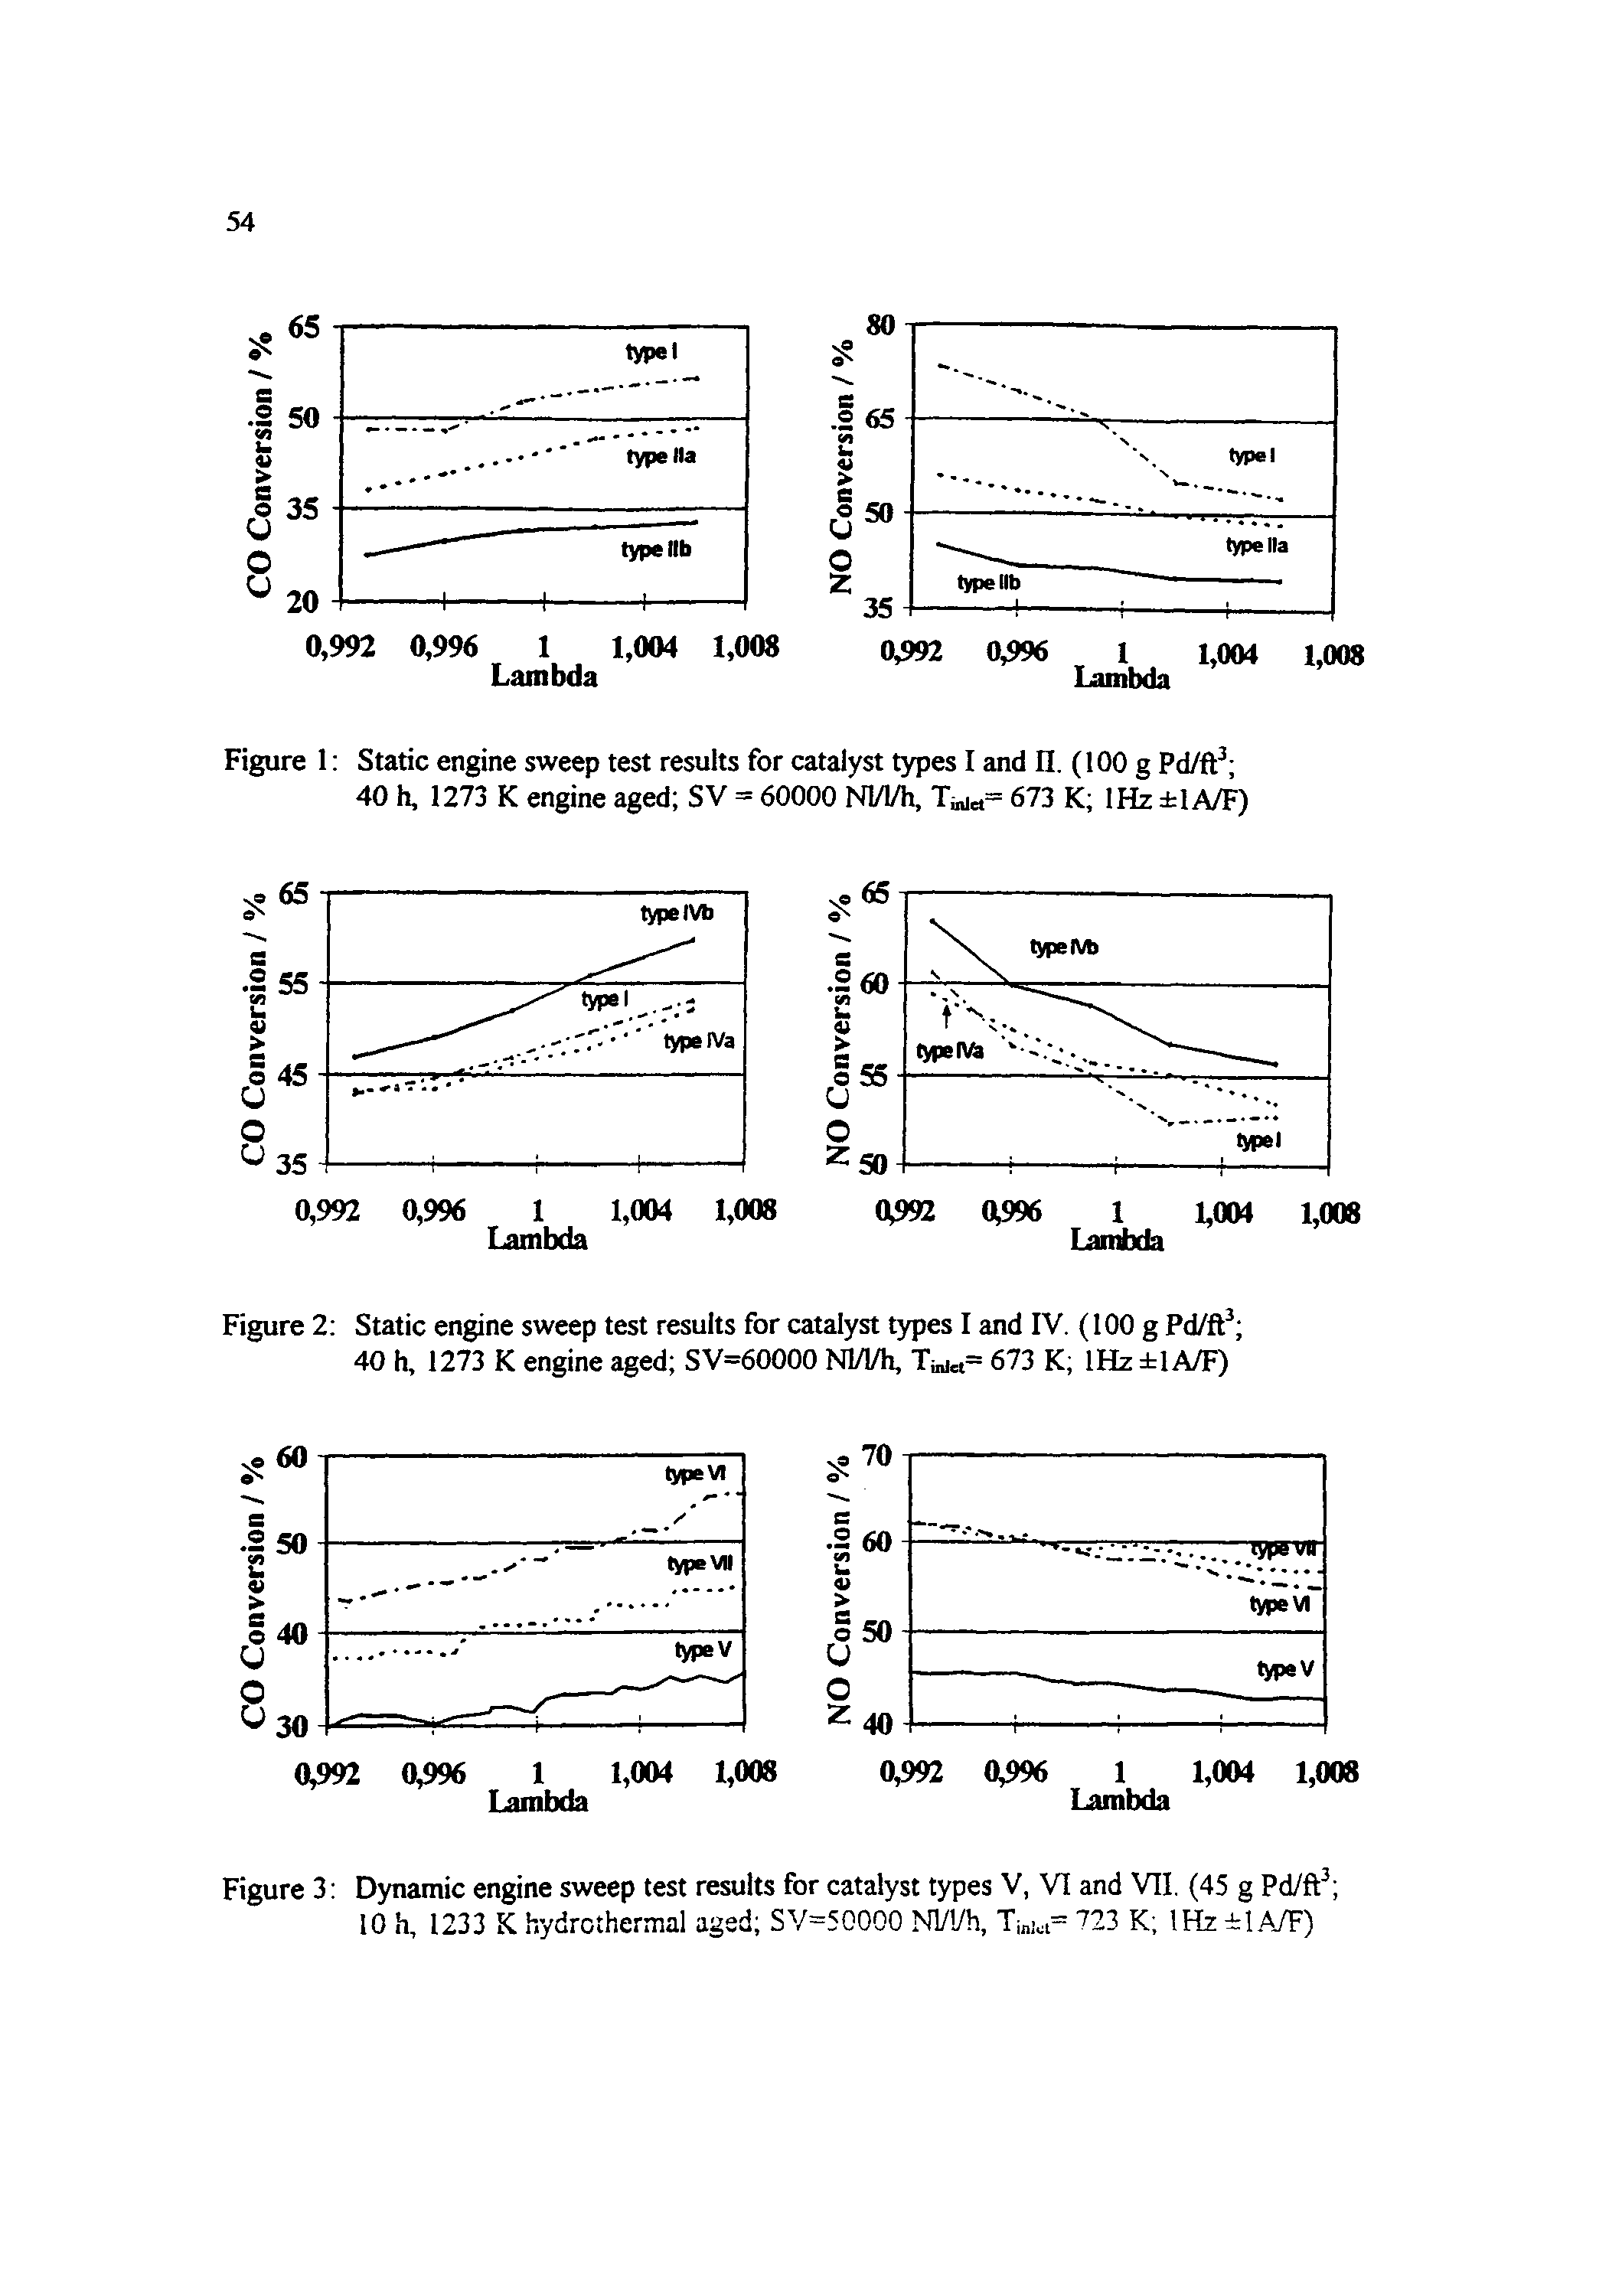 Figure 2 Static engine sweep test results for catalyst types I and IV. (100 g Pd/ft 40 h, 1273 K engine aged SV=60000 NWh, Tw = 673 K IHz 1A/F)...